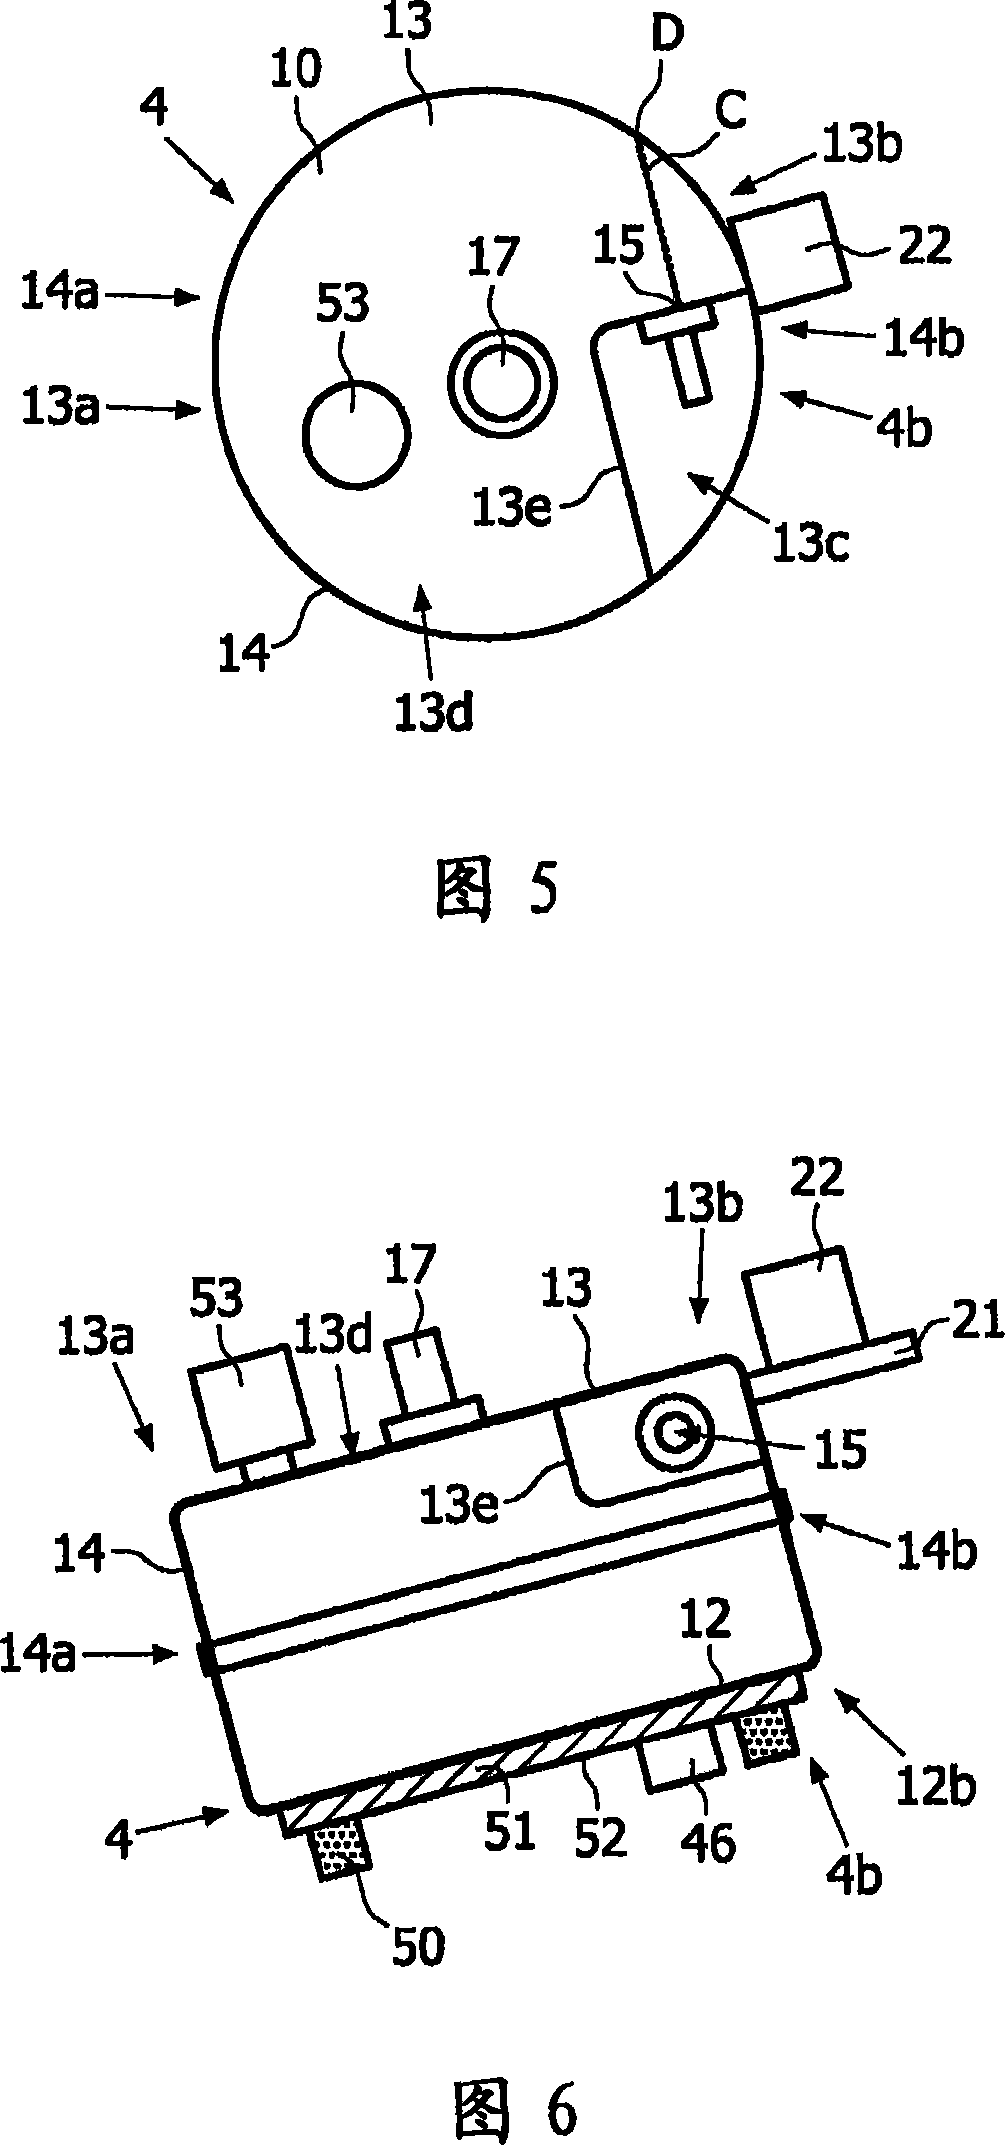 Boiler for use in a steam generating device